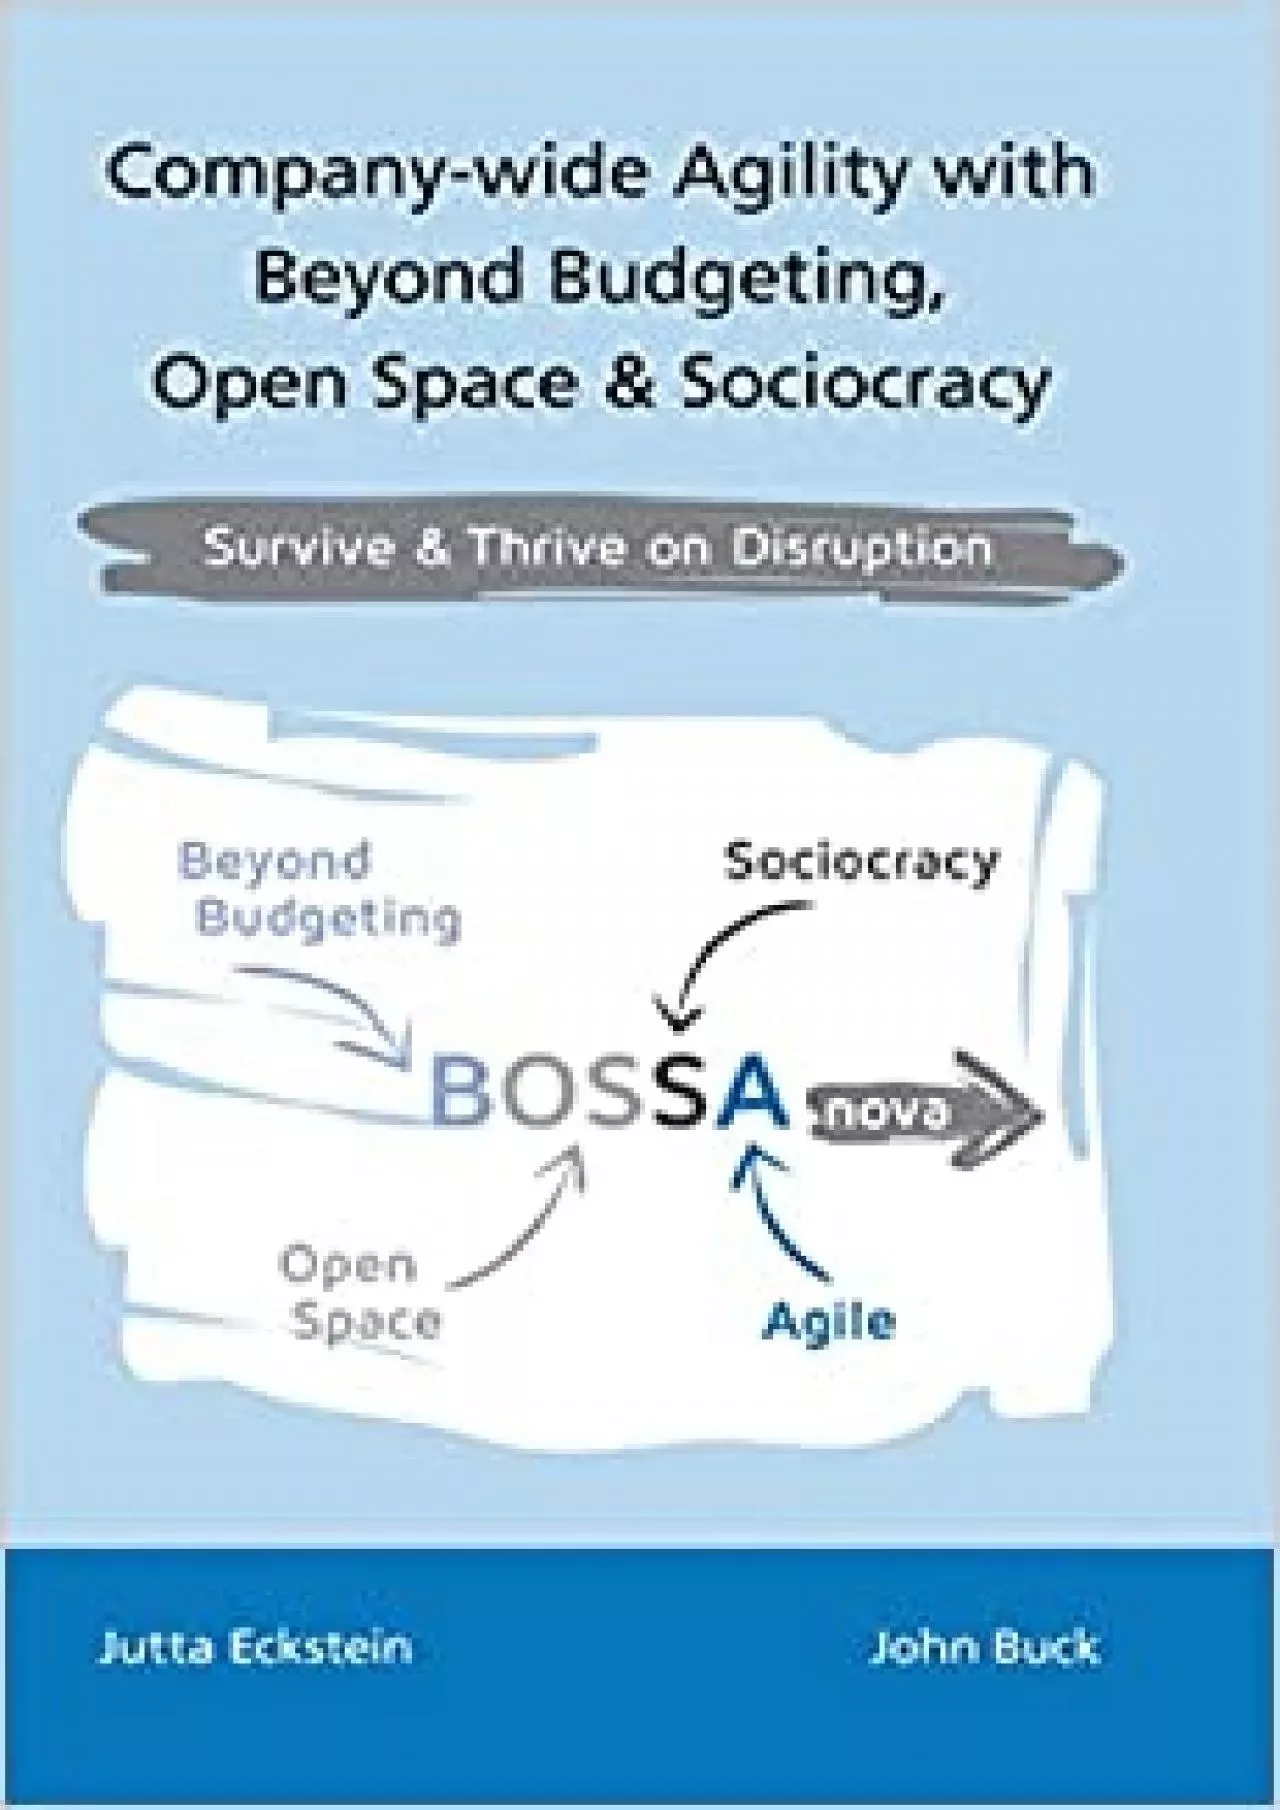 Company-wide Agility with Beyond Budgeting Open Space & Sociocracy: Survive & Thrive on